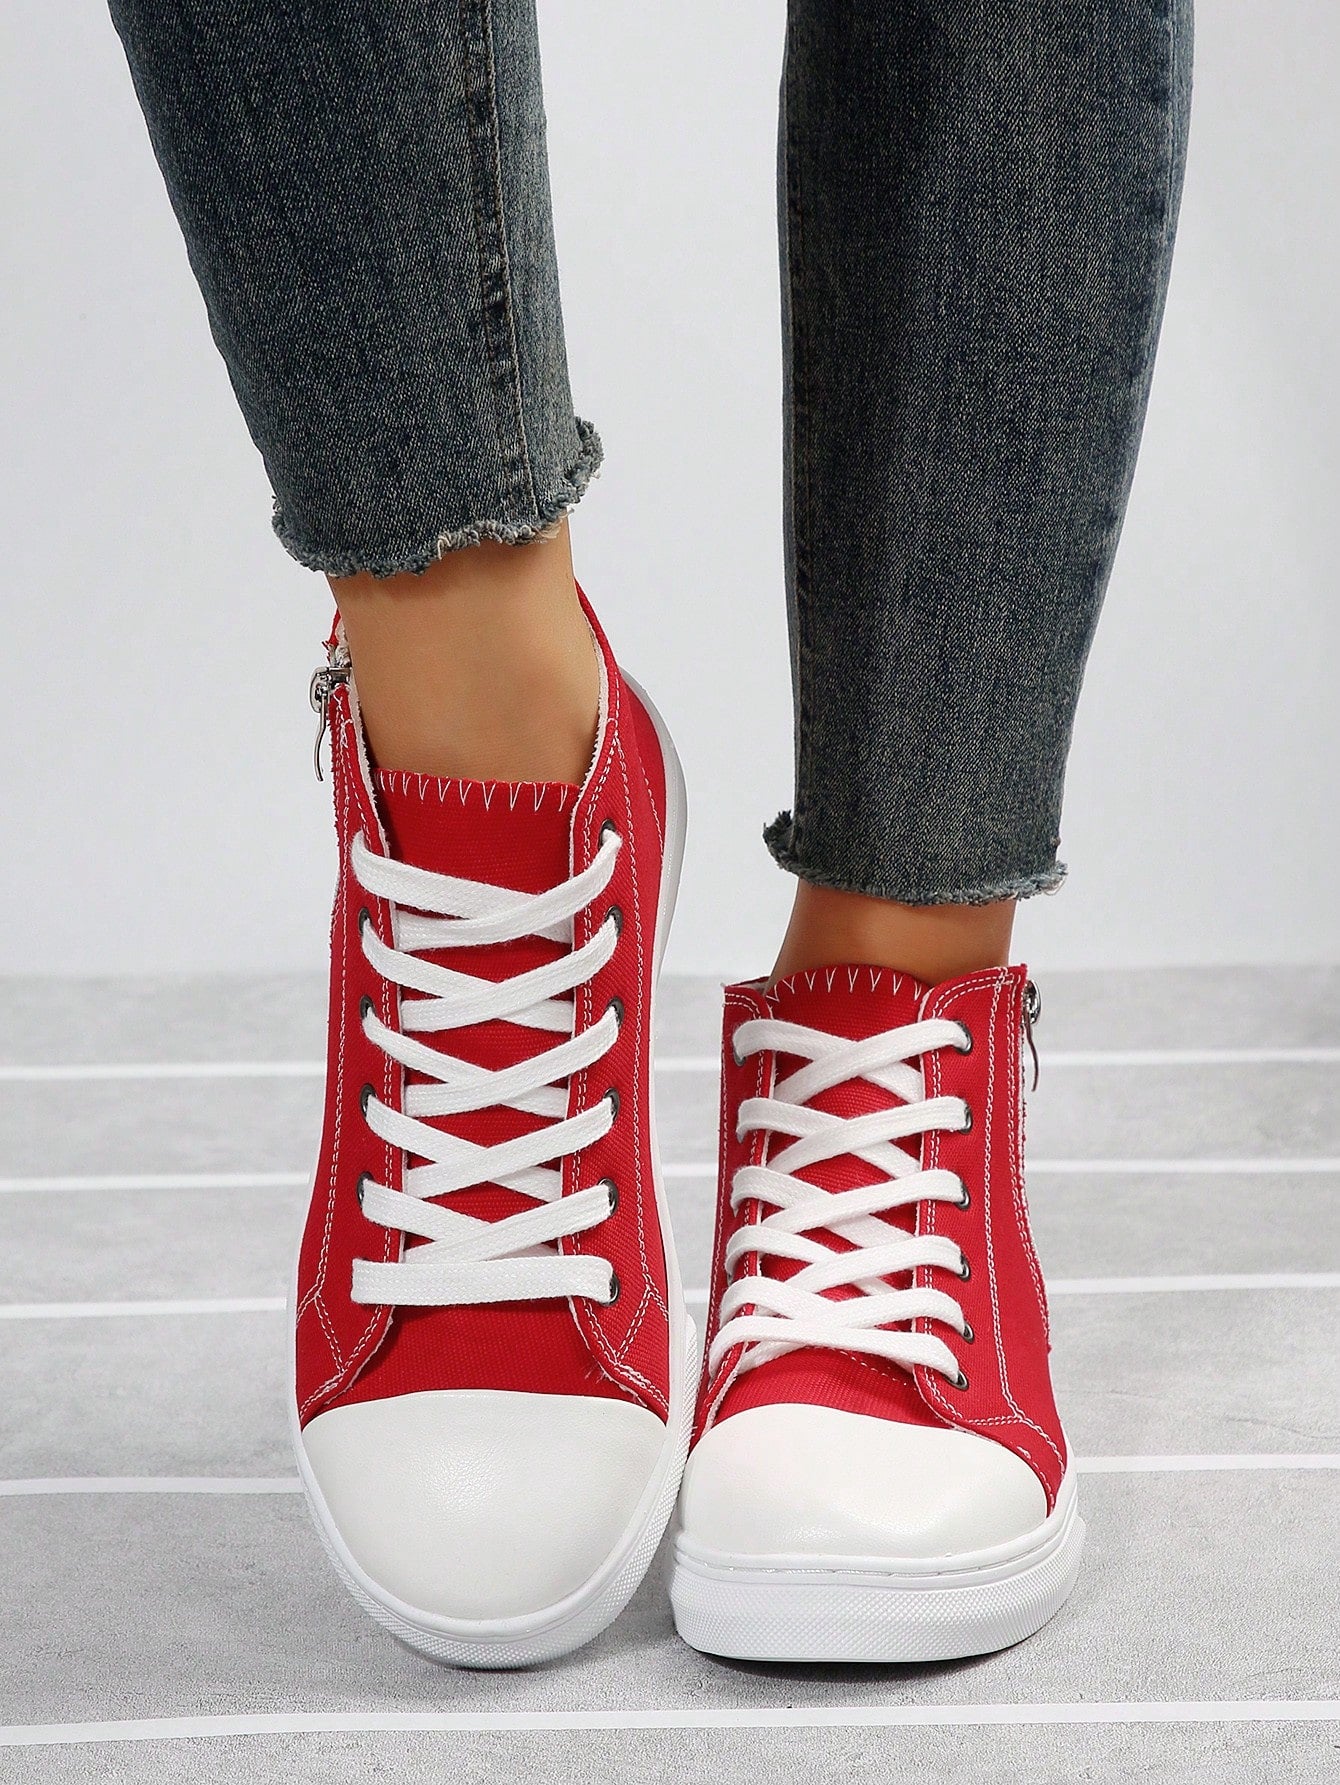 Women Fashionable Soft Classic Round Toe Lace-Up Canvas High-Top Casual Sports Shoes For All Seasons-Red-4